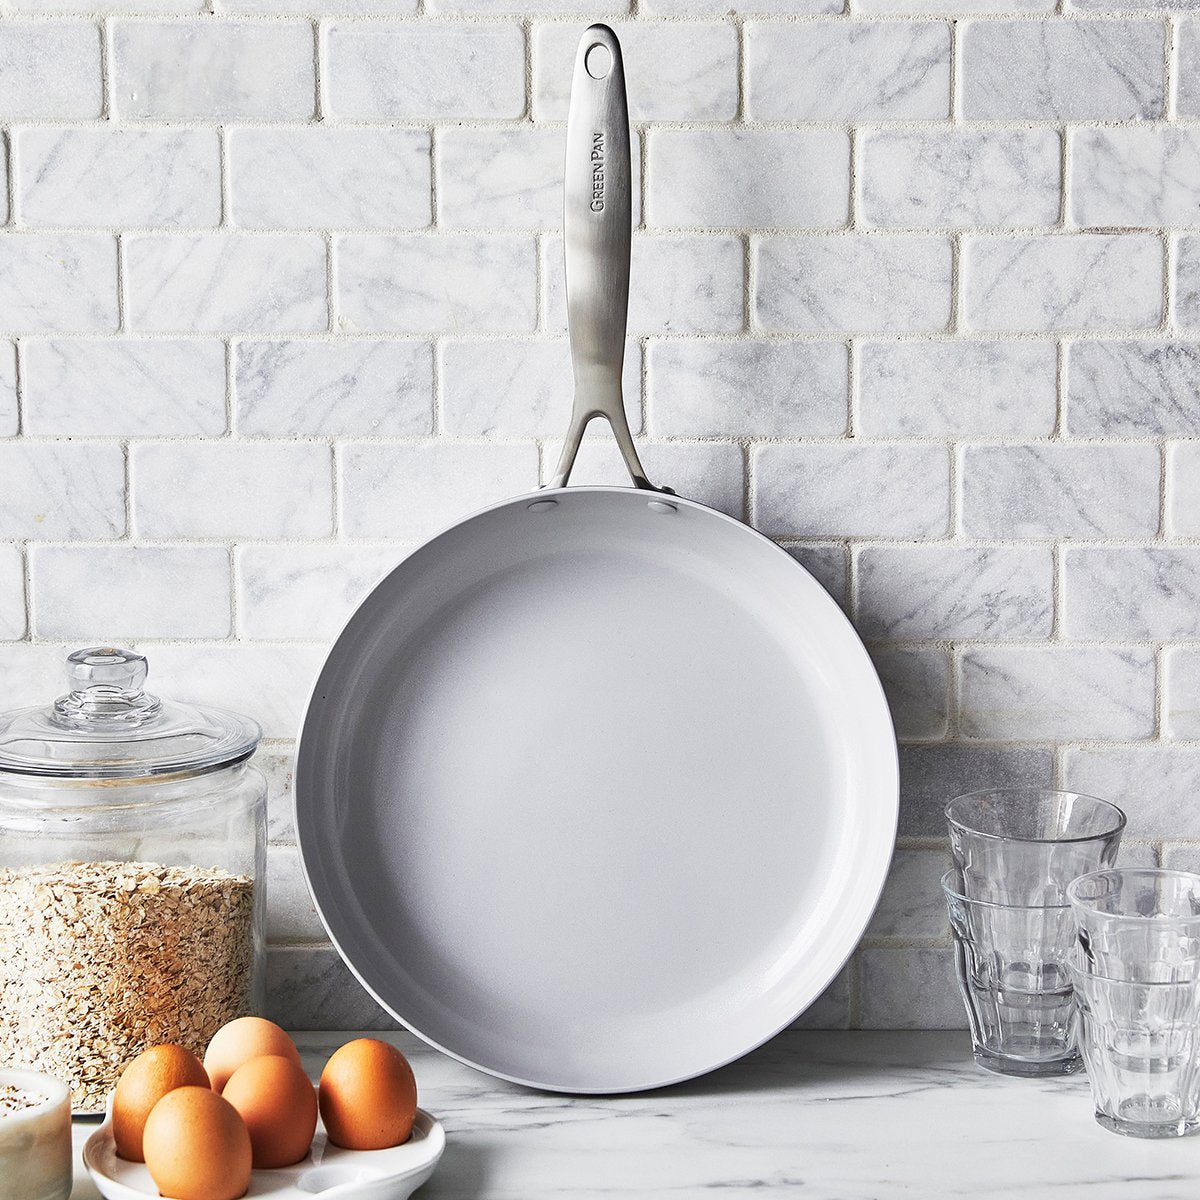 fry pan leaning on grey tile backsplash with eggs, canister, and glasses on countertop.